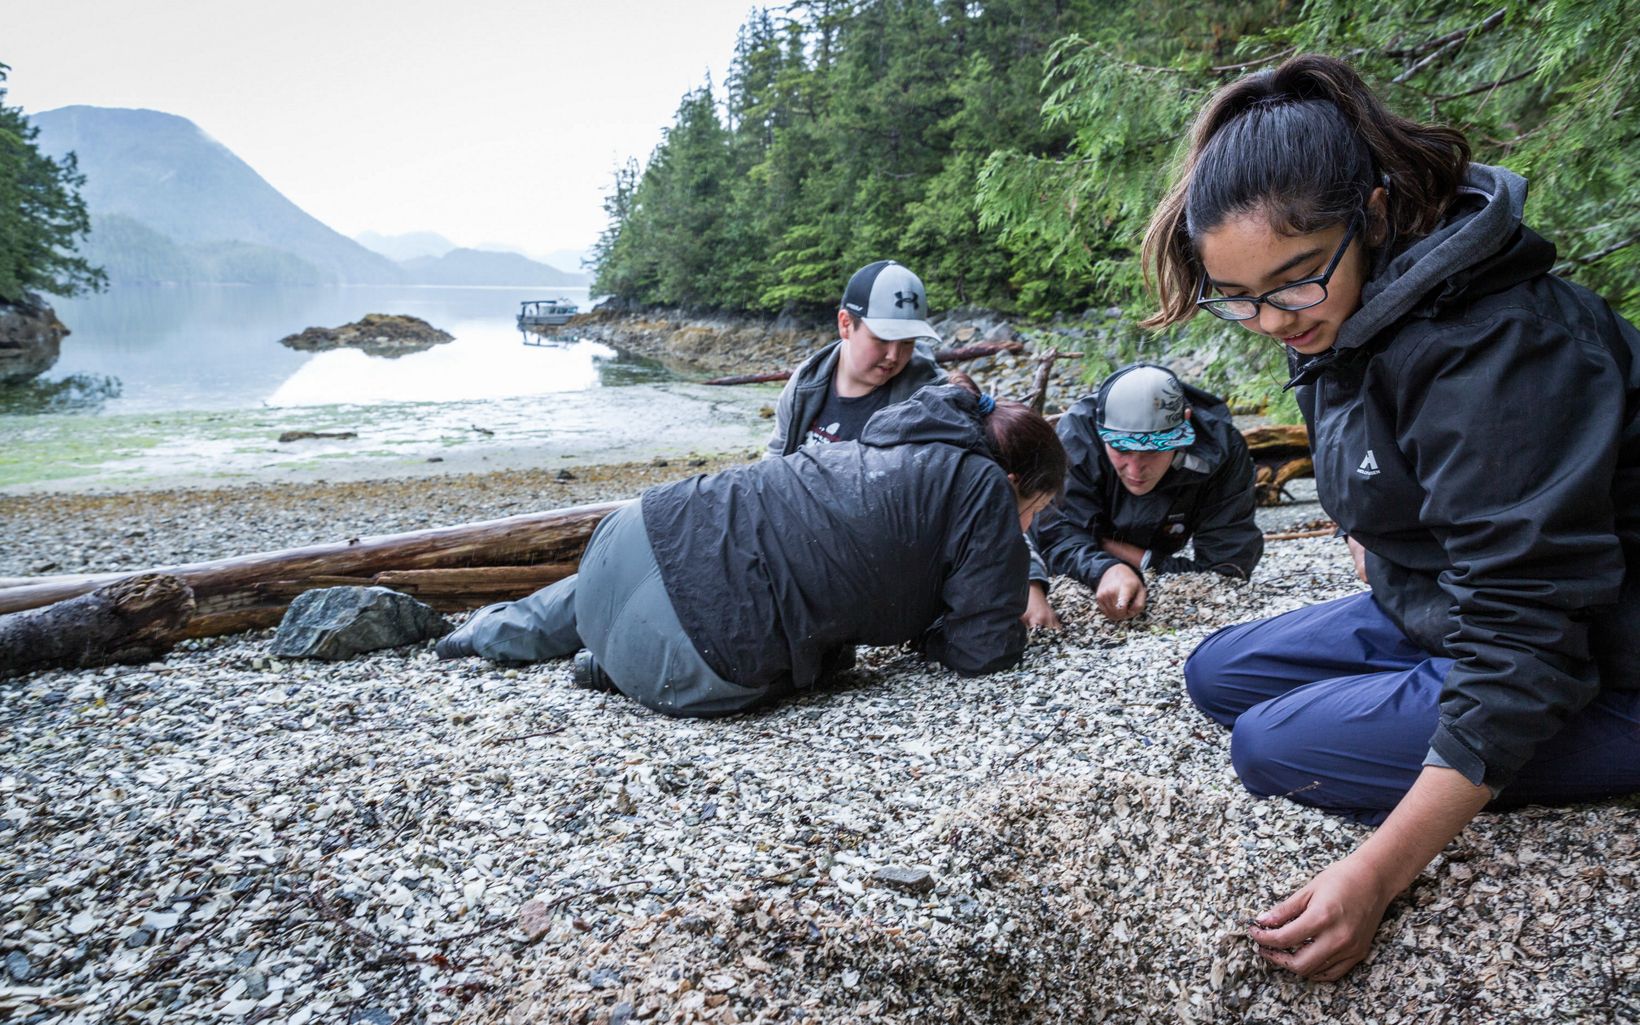 SEAS interns dig through an ancient shell midden site looking for artifacts in the Kitasoo/Xai'xais Nation of the Great Bear Rainforest.